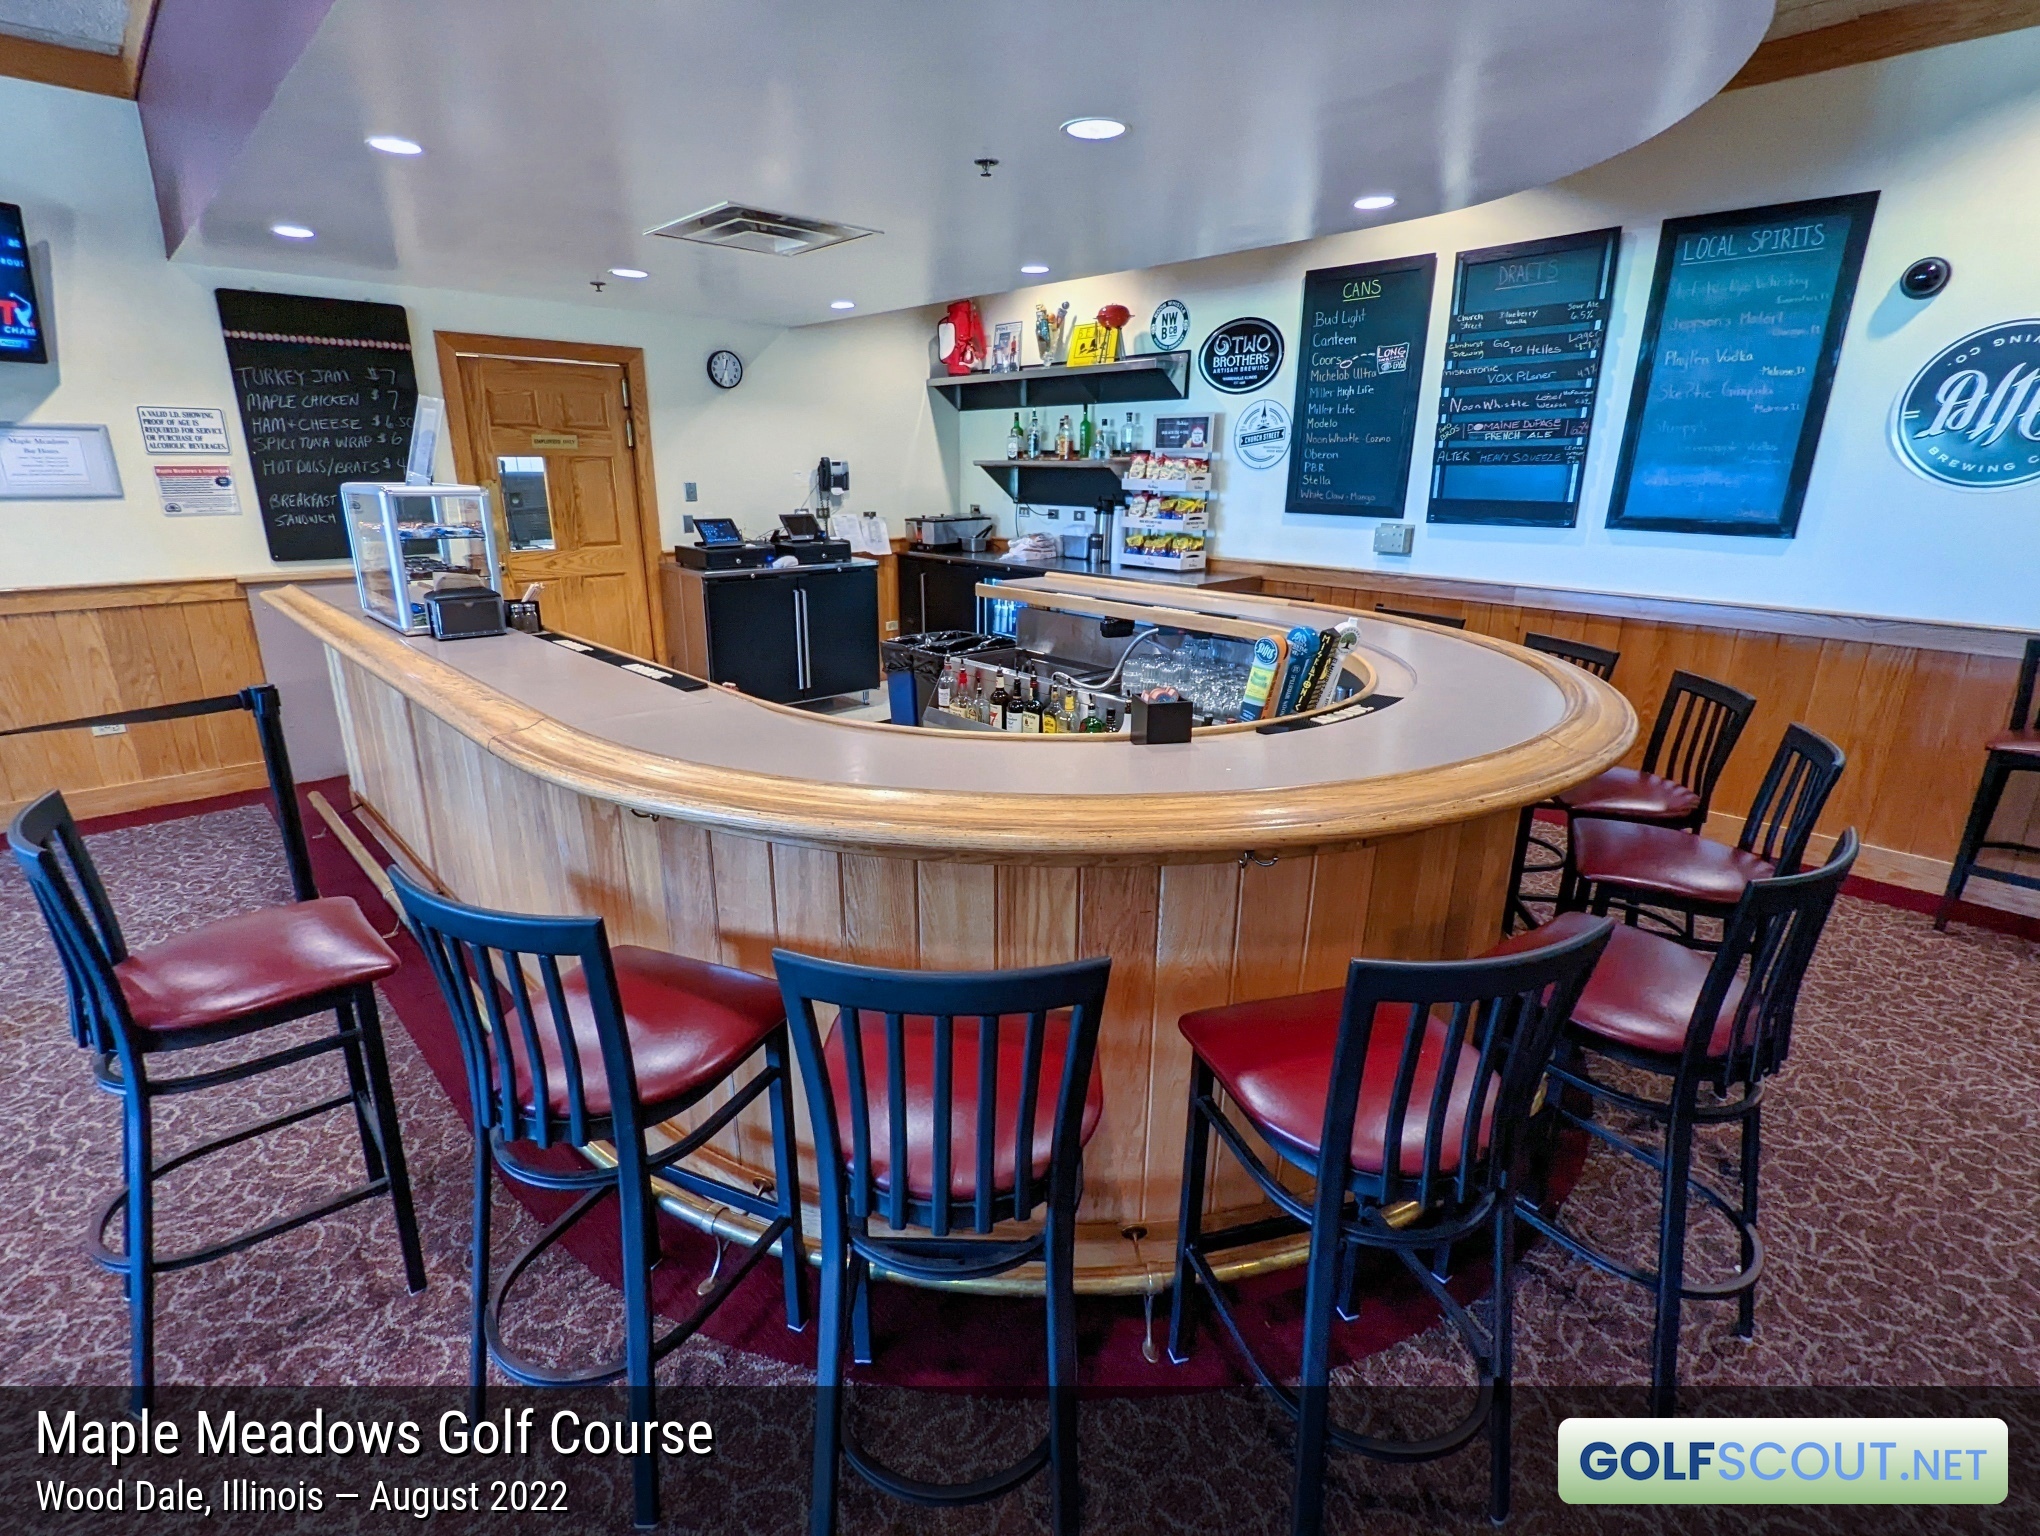 Photo of the restaurant at Maple Meadows Golf Course in Wood Dale, Illinois. 